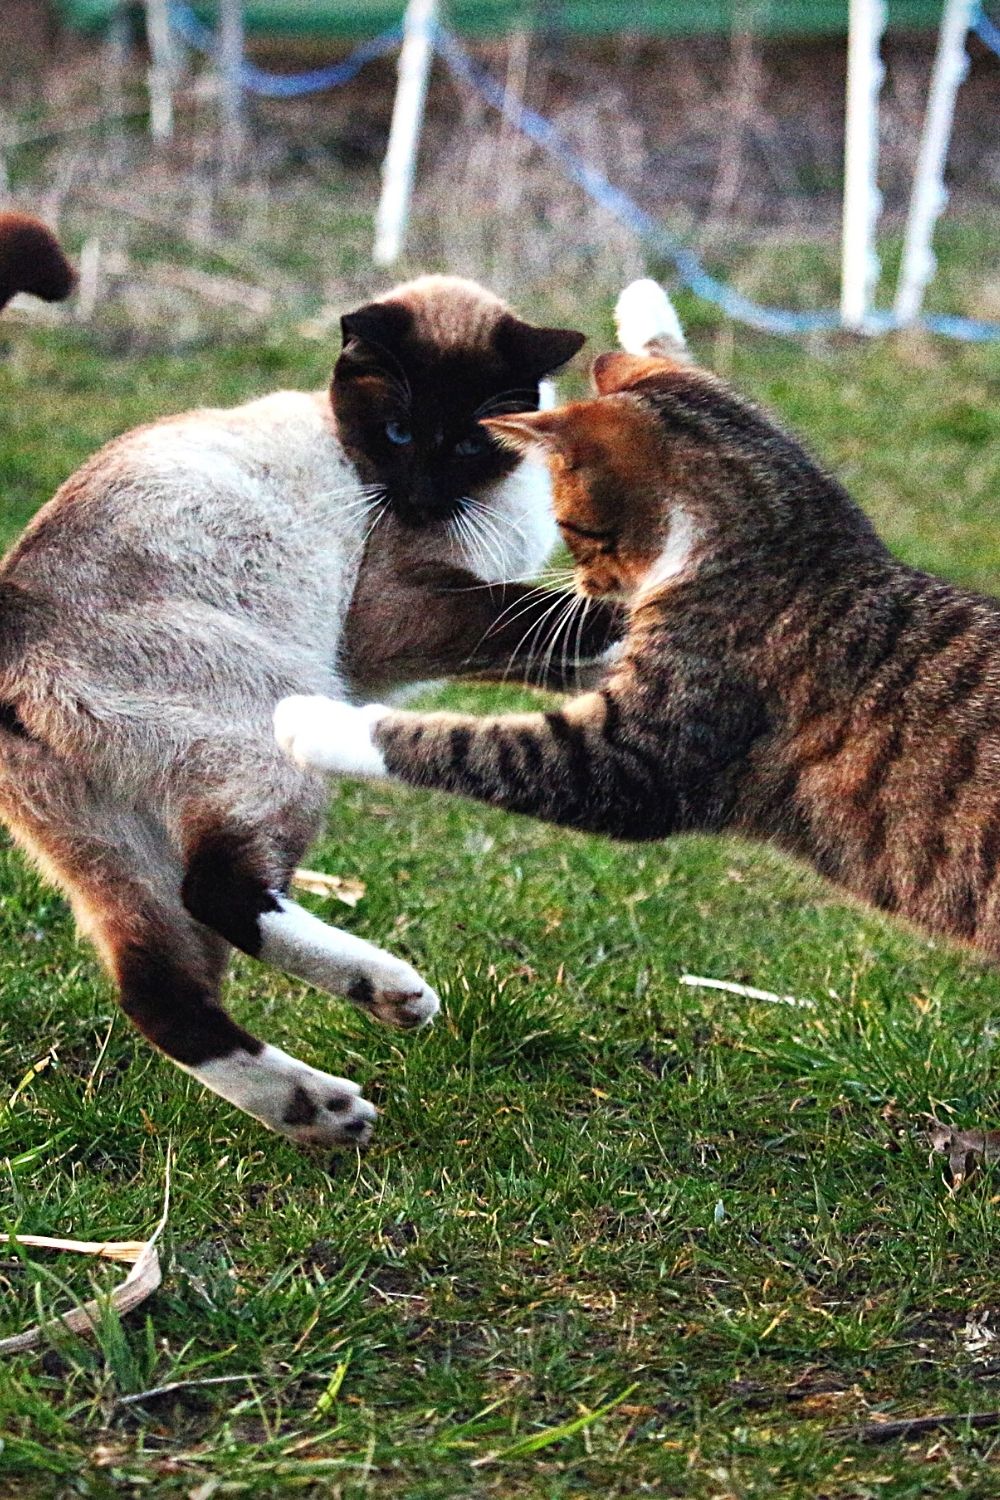 Territorial fights can break out between cats even if they spray to mark their turf